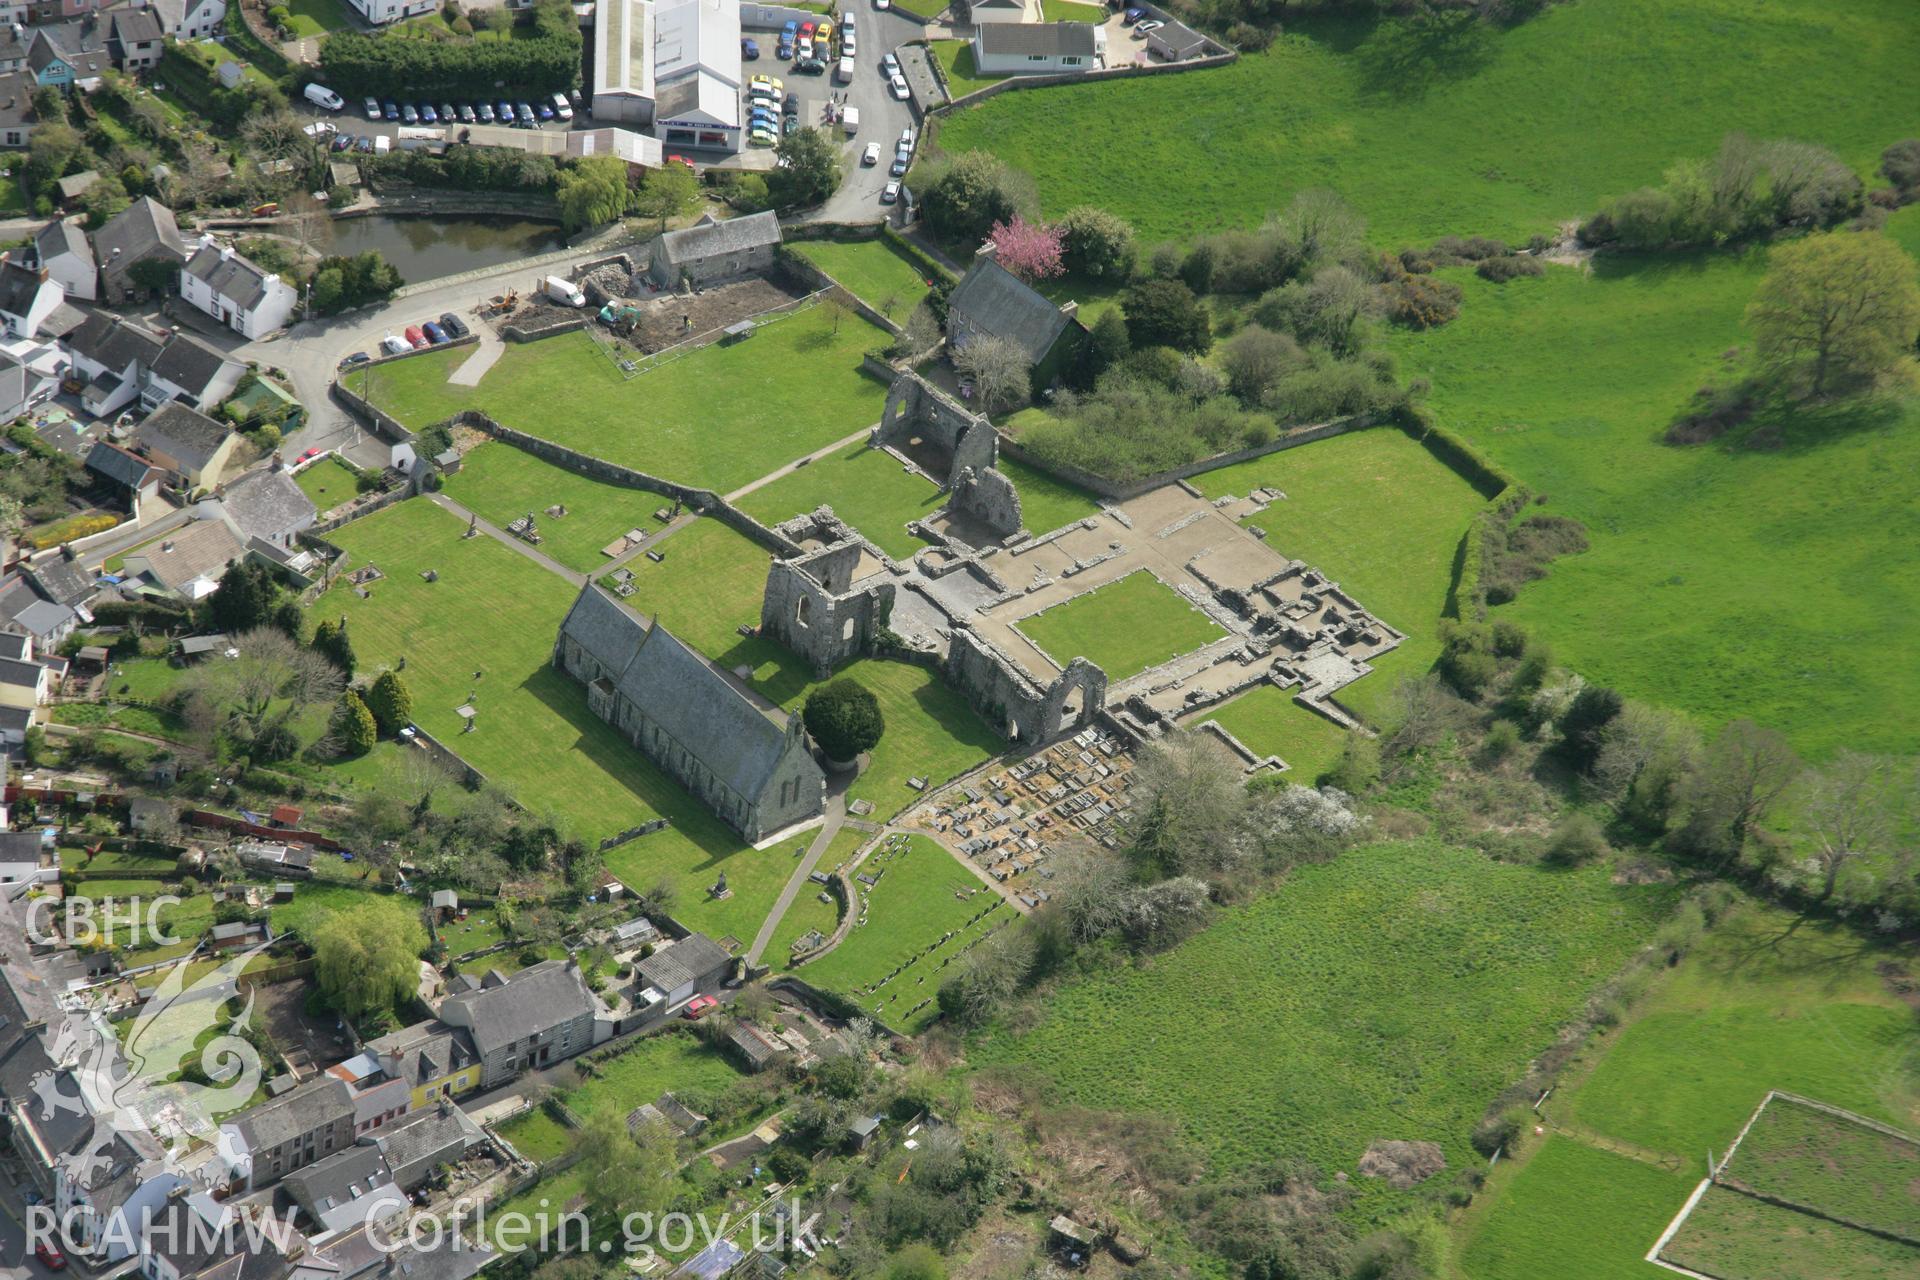 RCAHMW colour oblique aerial photograph of St Dogmaels Abbey. Taken on 17 April 2007 by Toby Driver